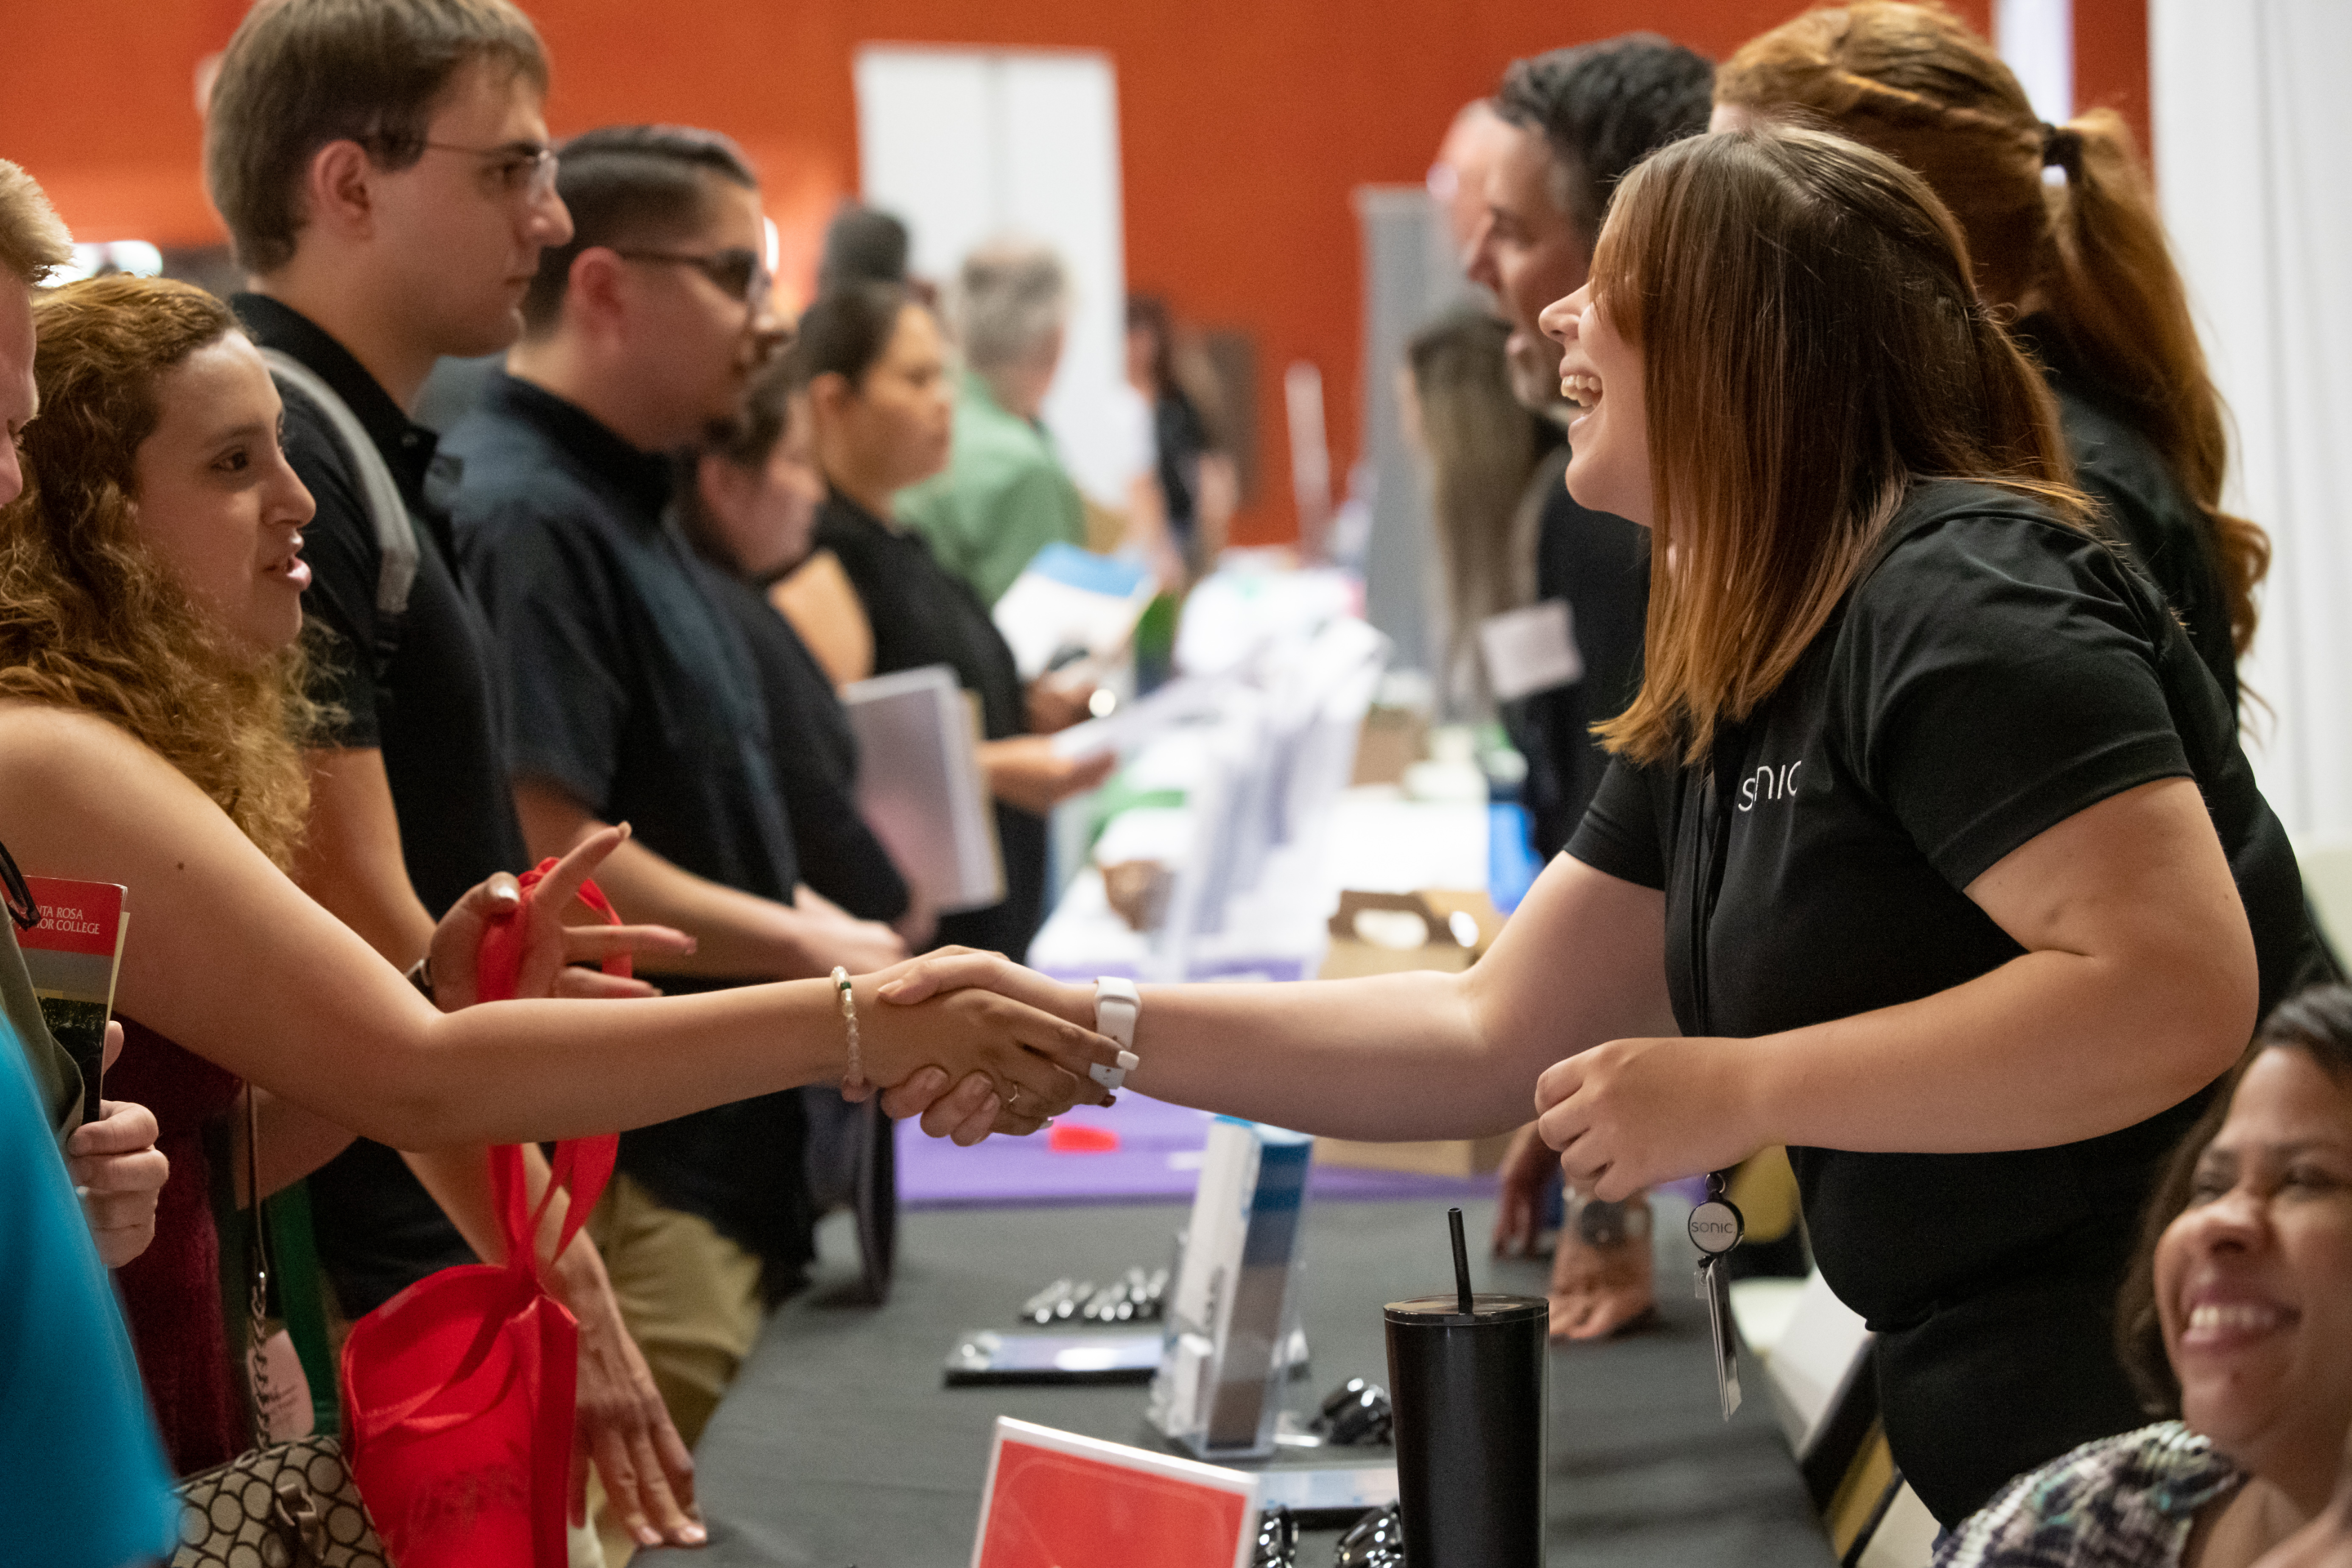 Employer shaking a student's hand at a career fair